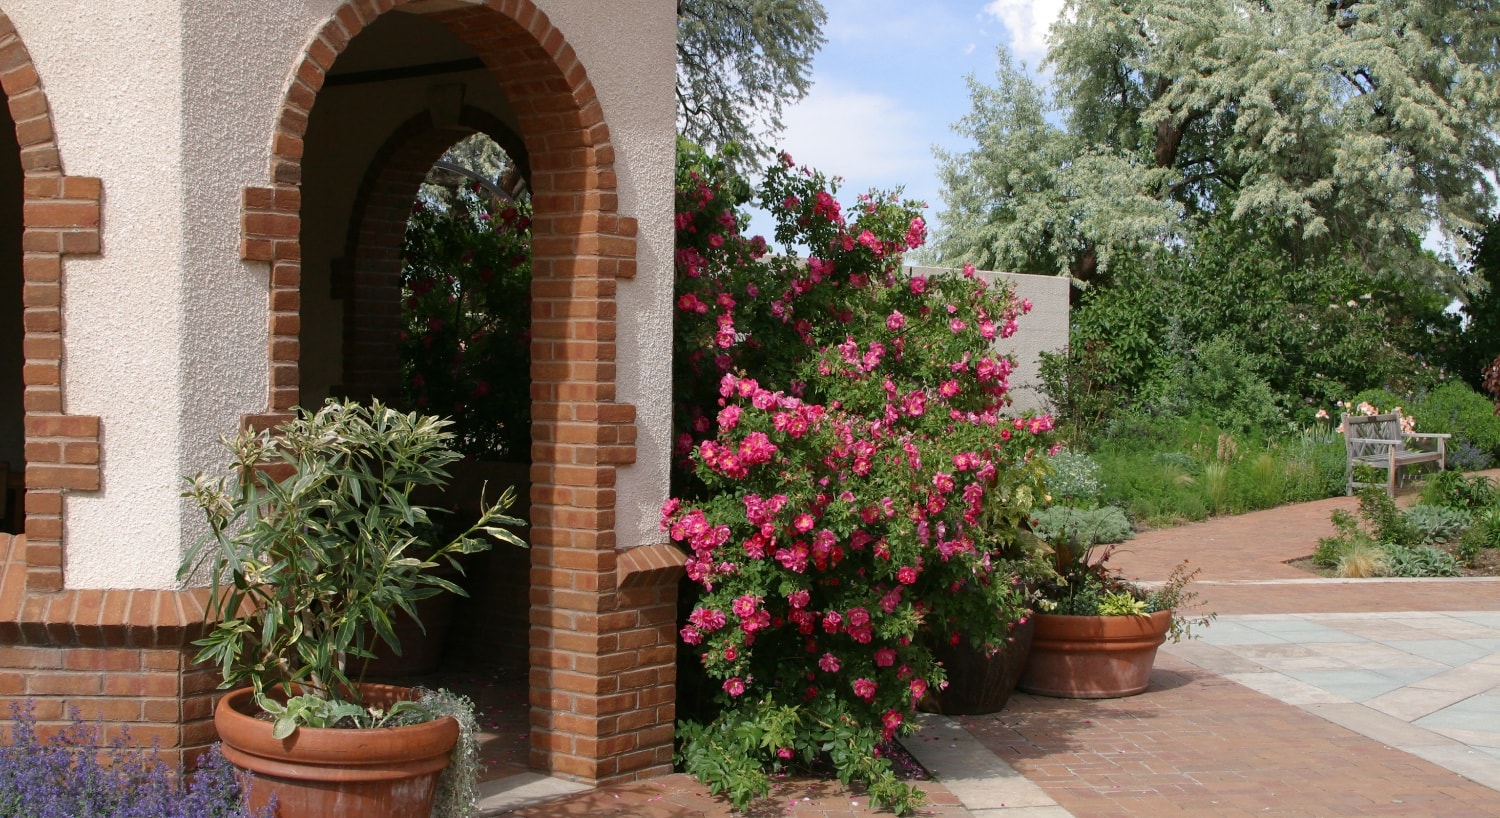 Stucco and brick building surrounded by purple and pink flowers, bushes, and trees